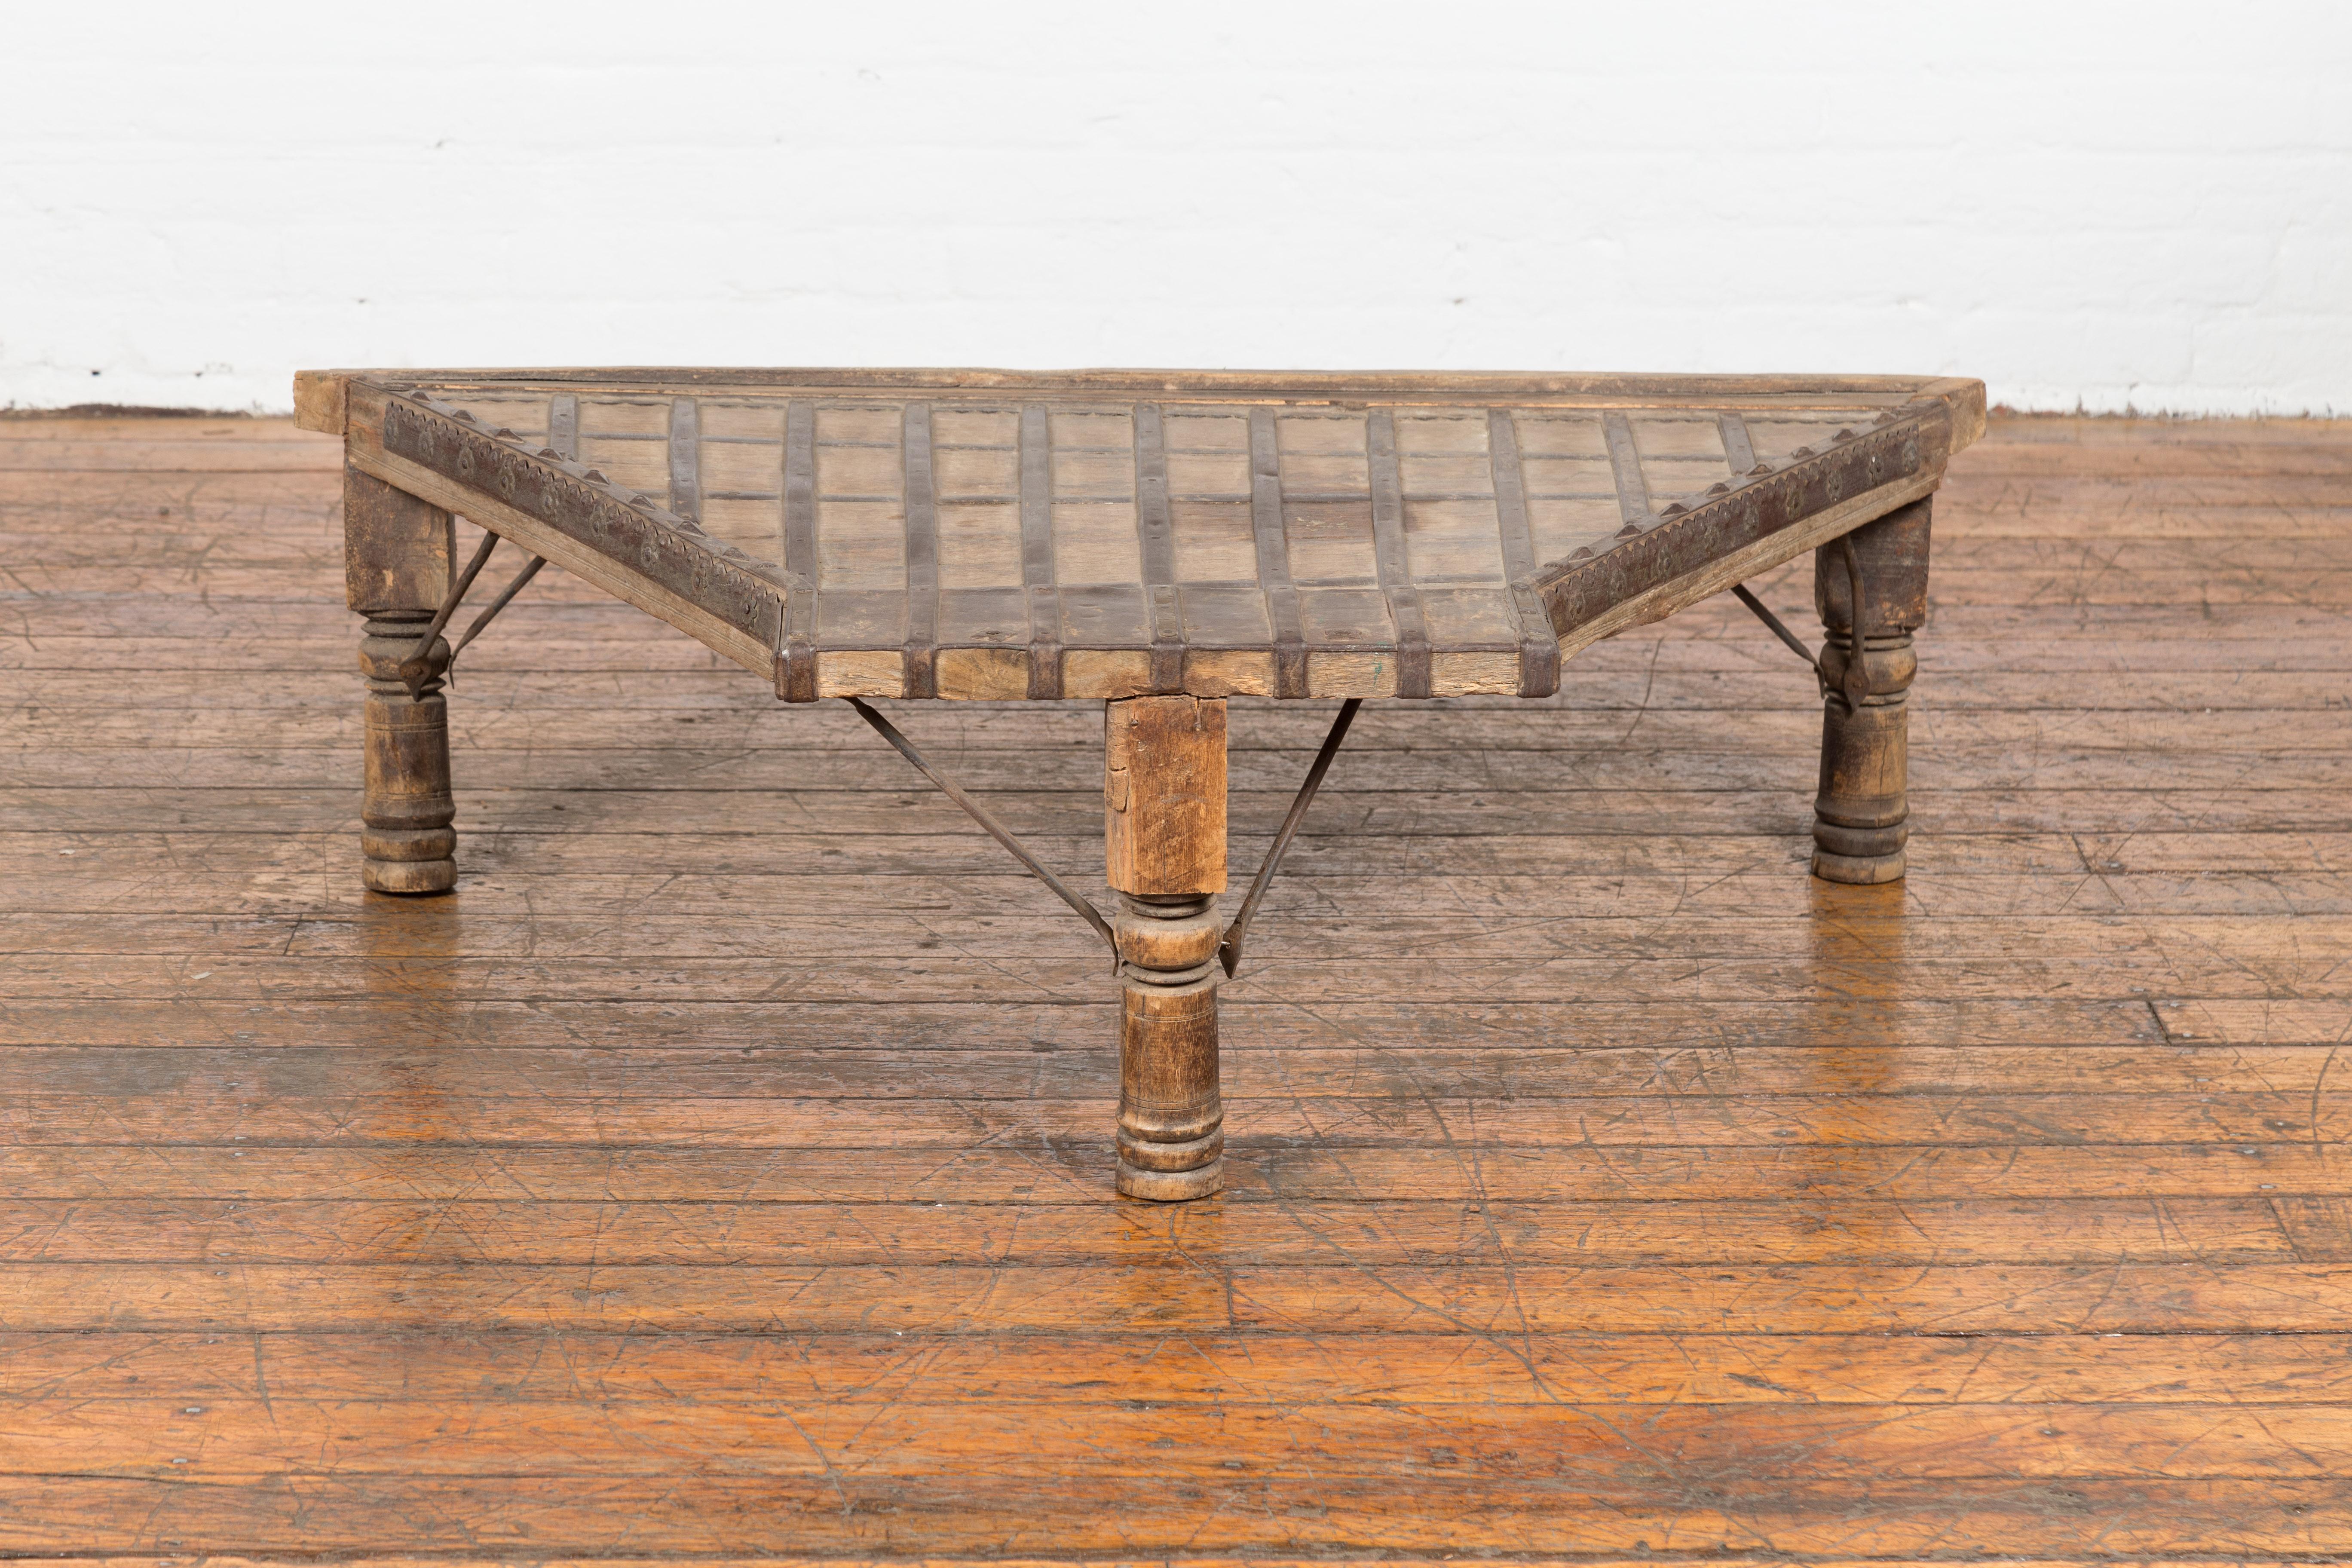 An antique rustic Indian handmade coffee table from the 19th century with trapezoidal top, protruding front, iron stretchers, petite rosettes, turned baluster legs and weathered patina. This antique rustic Indian handmade coffee table from the 19th